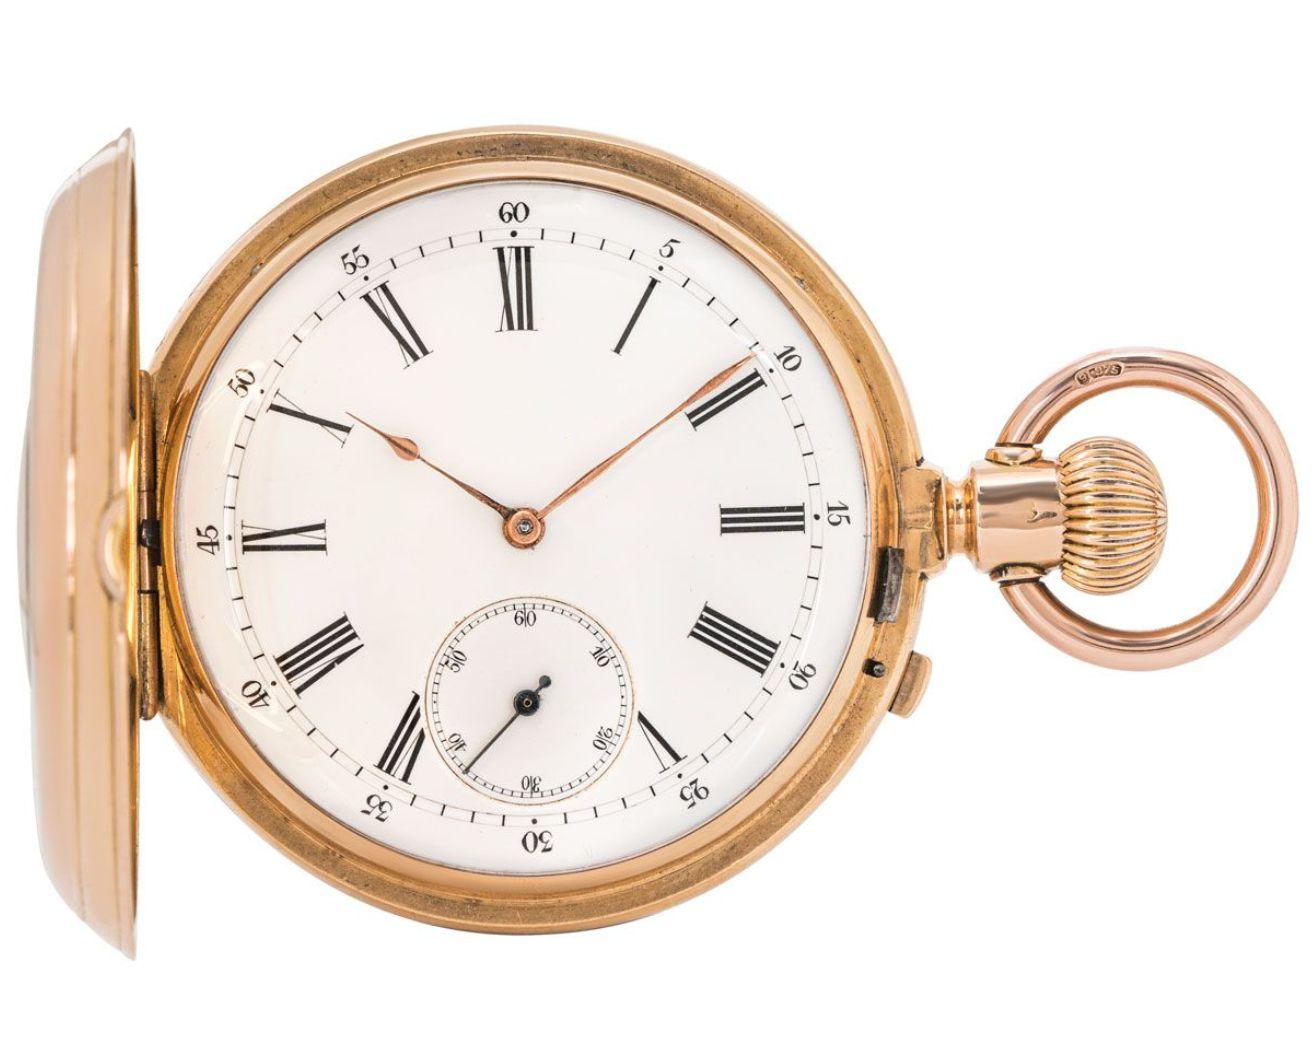 An Historic and Rare Rose Gold Enamelled Keyless Pivoted Detente Cronometre Half Hunter Pocket Watch C1880.

Dial: The excellent white enamel dial with Roman Numerals, outer minute track with Arabic numbers at five minute intervals, subsidiary